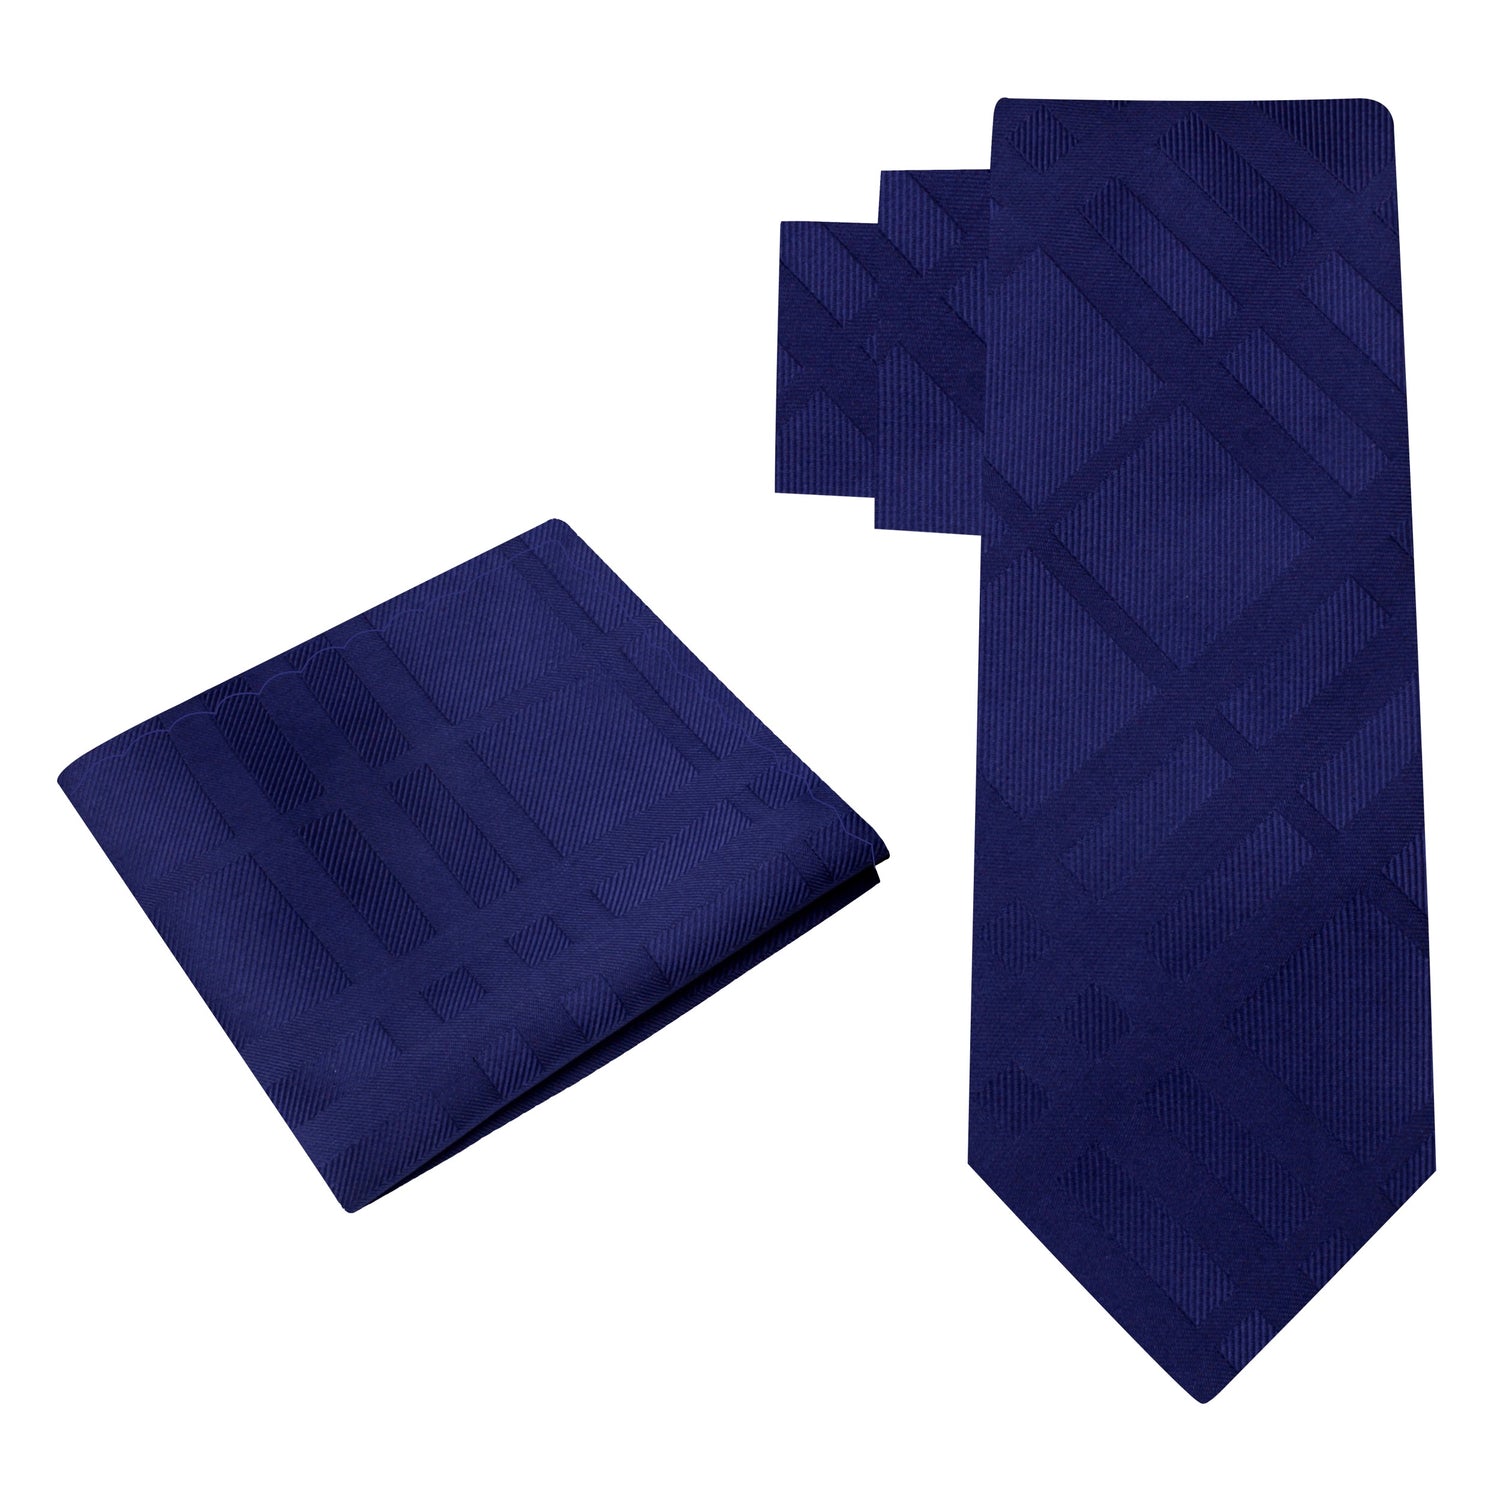 View 2: A Solid Dark Blue With Lines Texture Silk Necktie, Matching Pocket Square